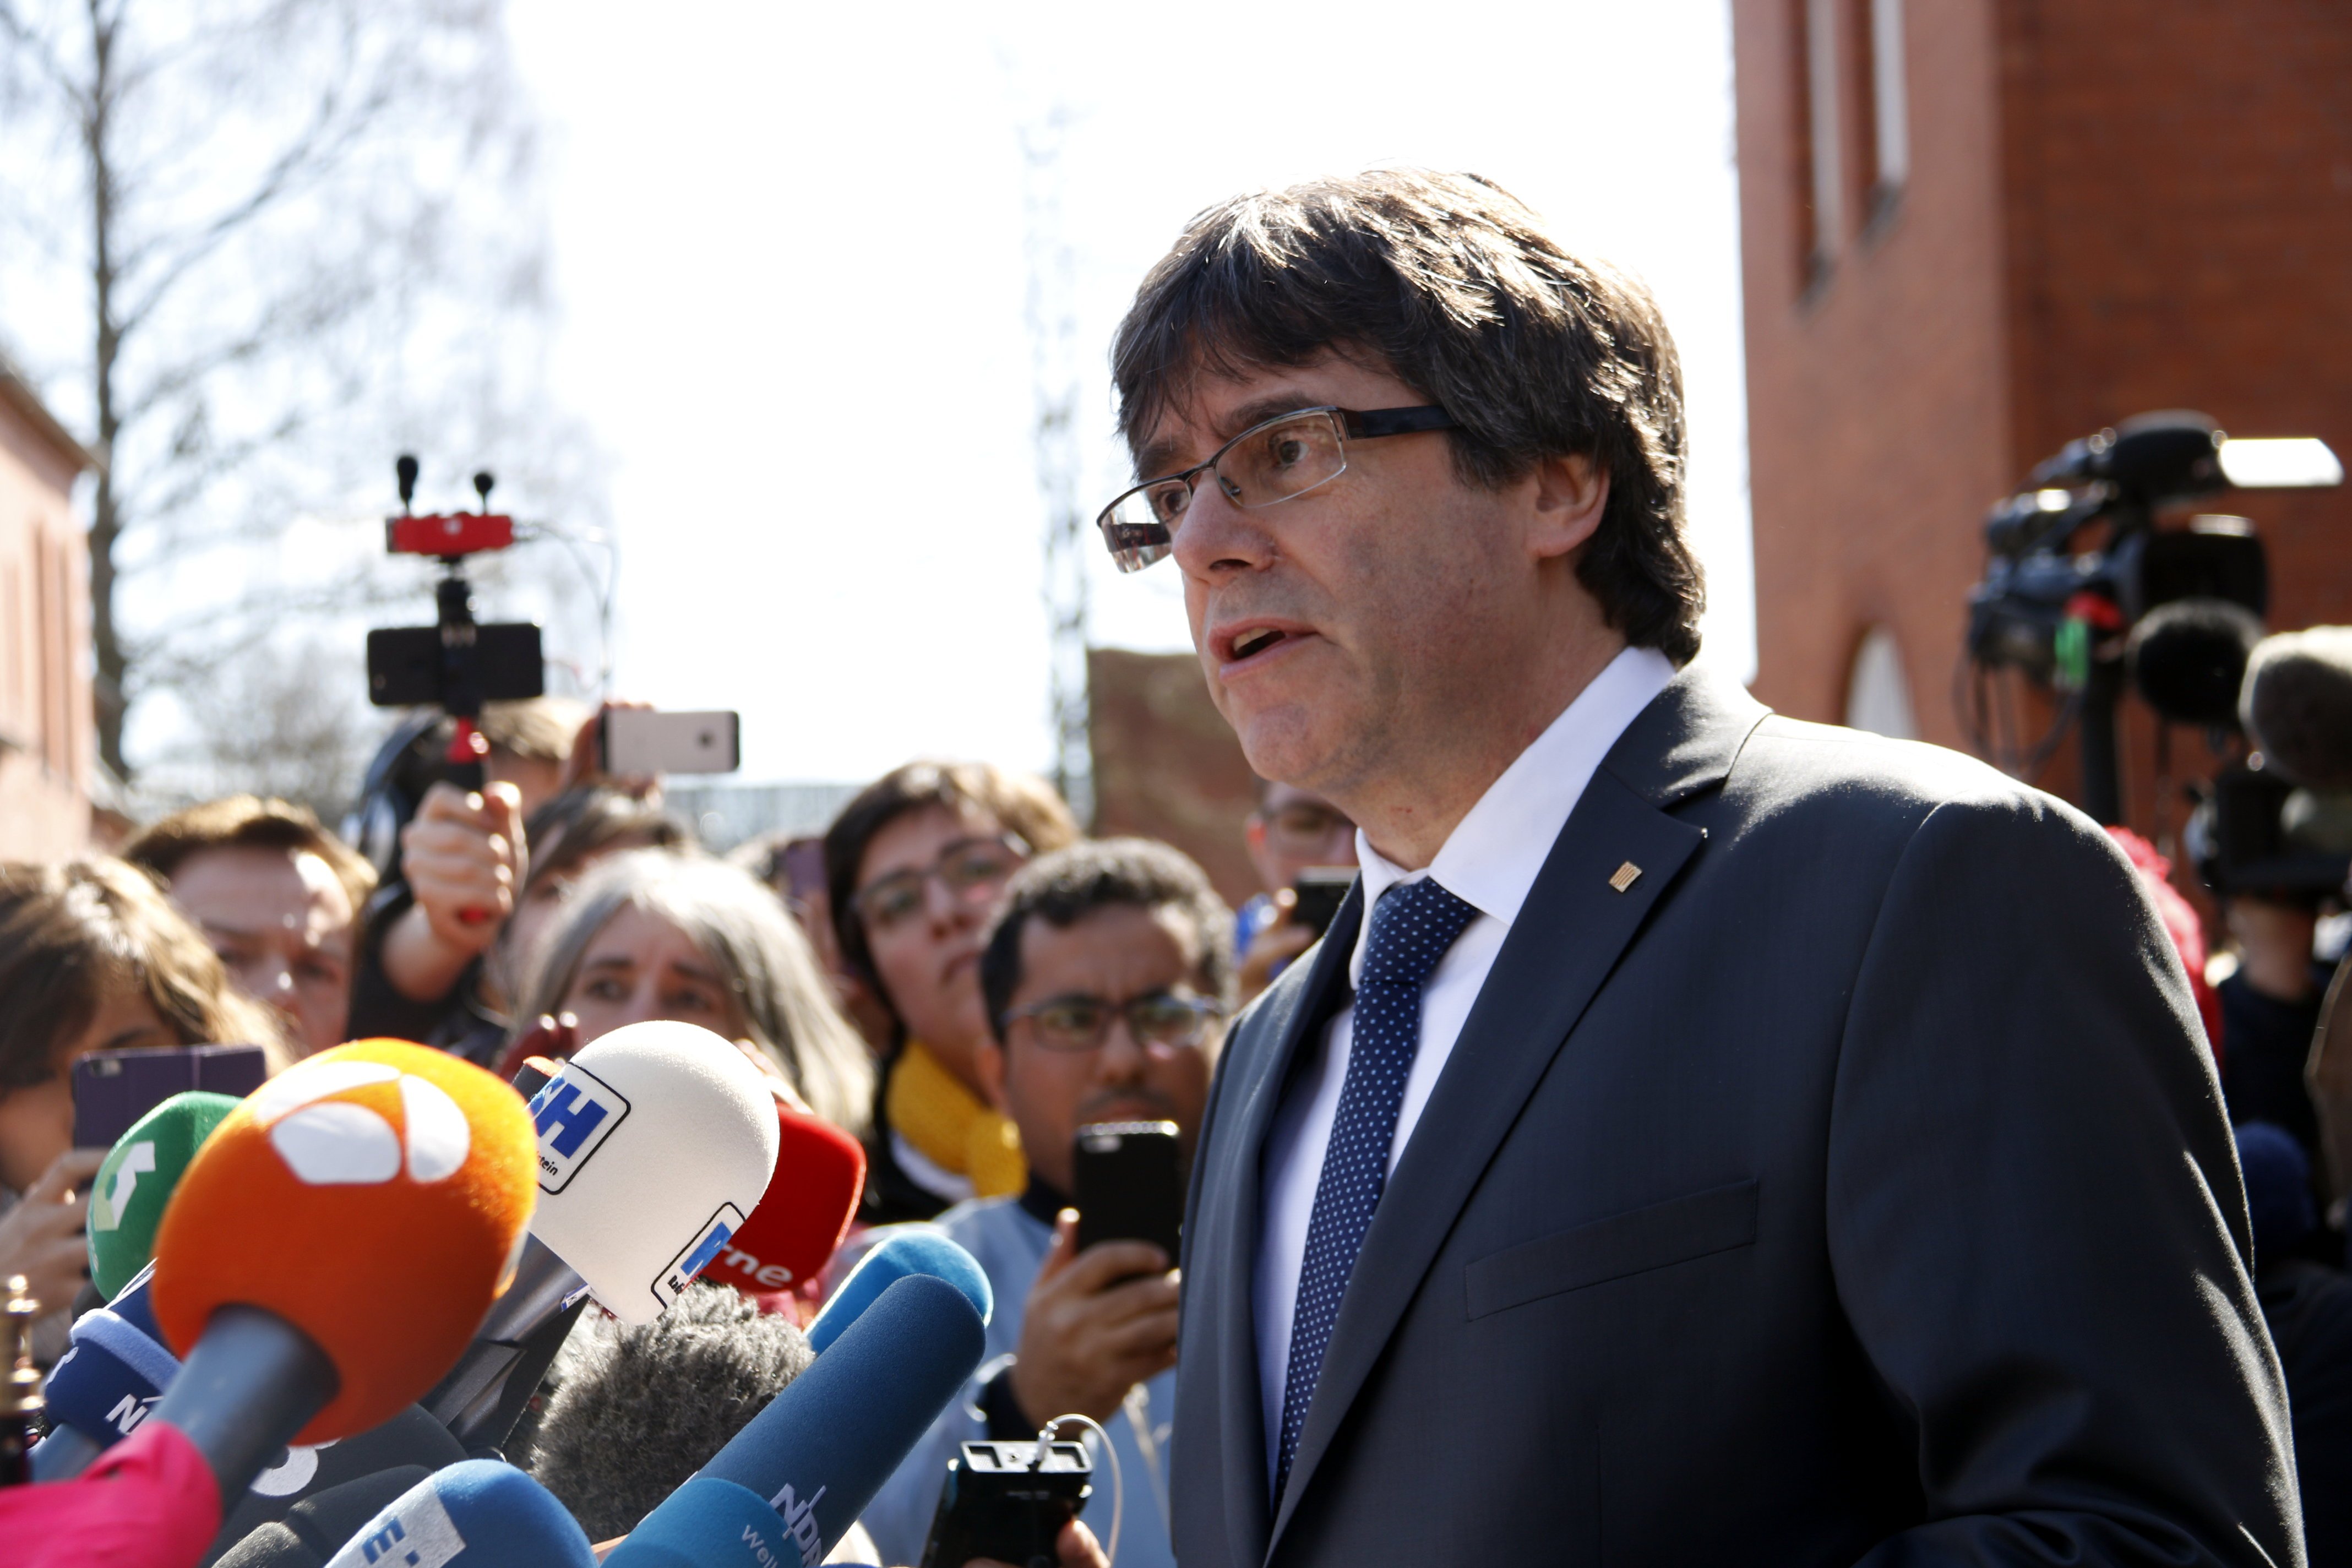 Puigdemont travels to Berlin, cancels events in Neumünster